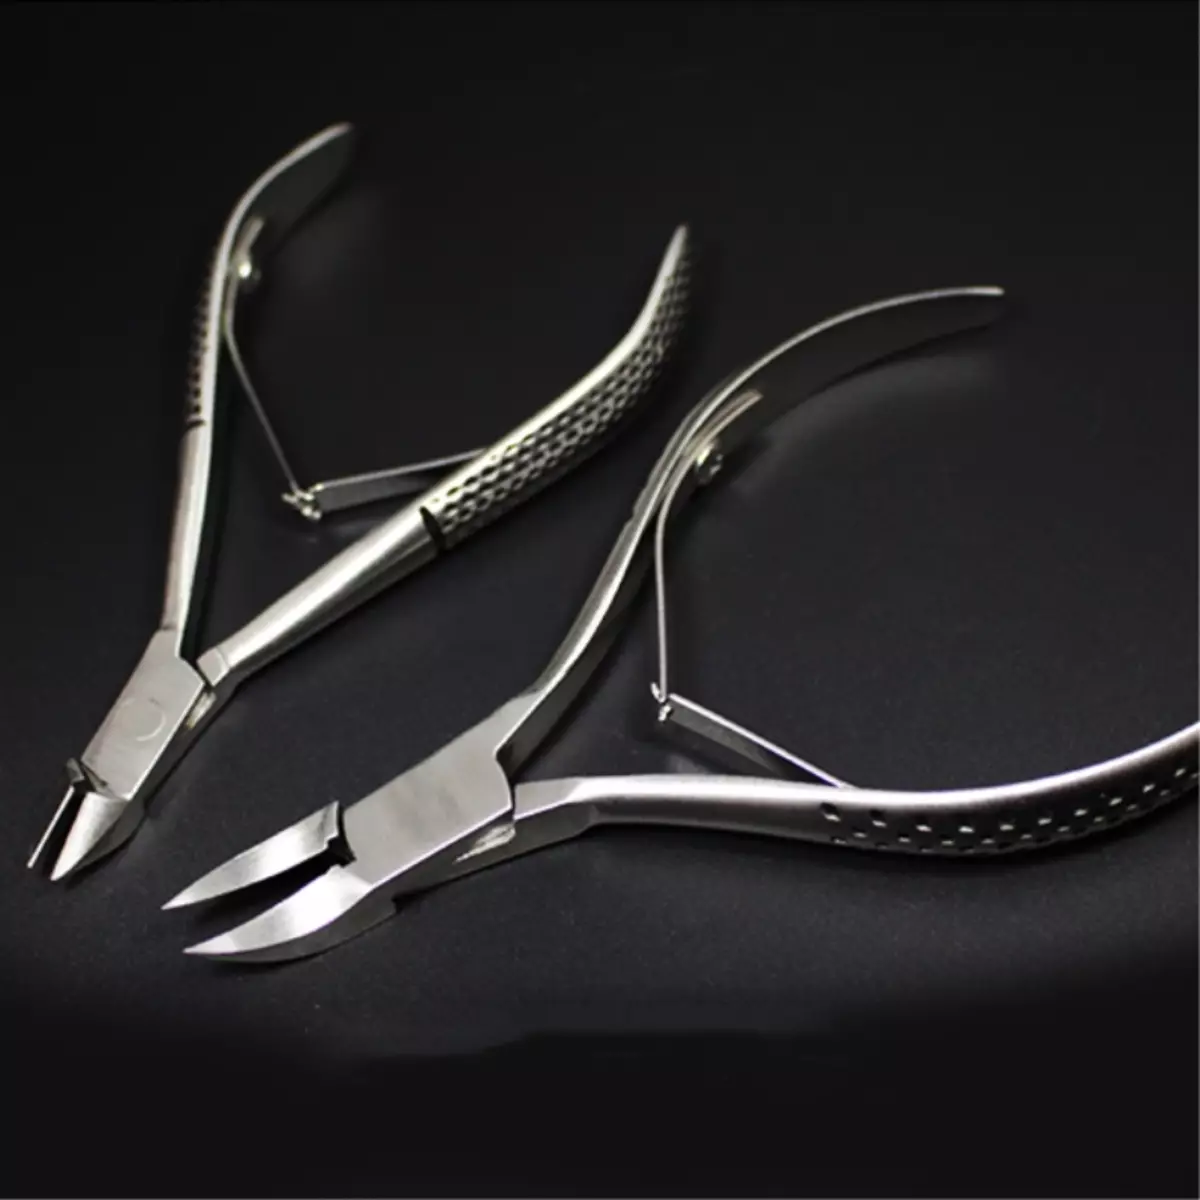 Scissors for the cuticle: How to choose Professional Cumor-Tweezers and Trimmers Zinger or Yoko to remove cuticle? 17054_12